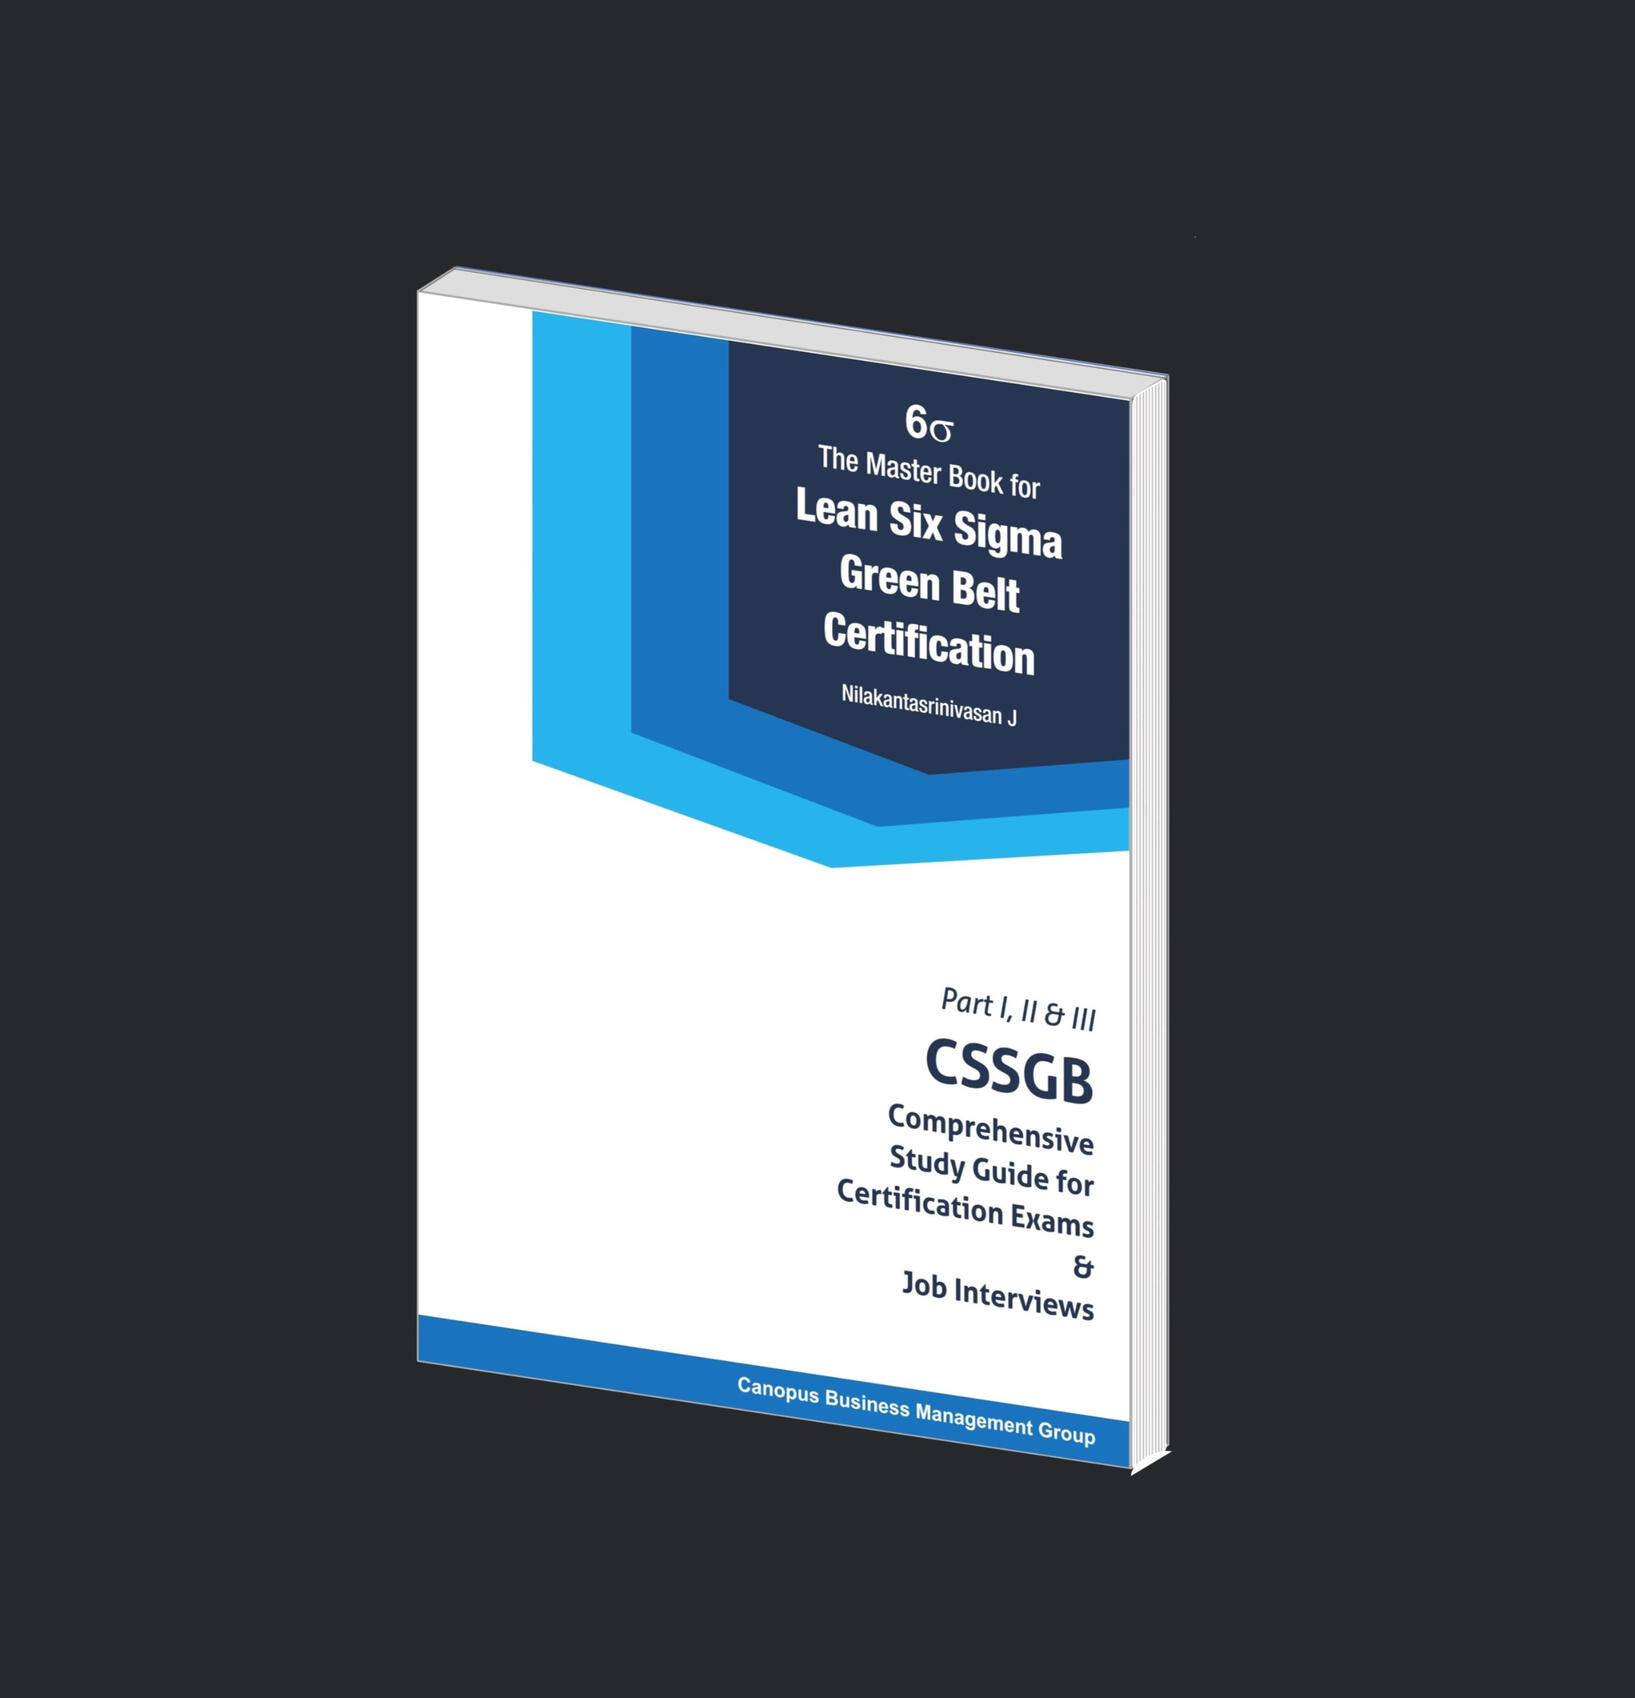 The Master Book for Lean Six Sigma Green Belt Certification